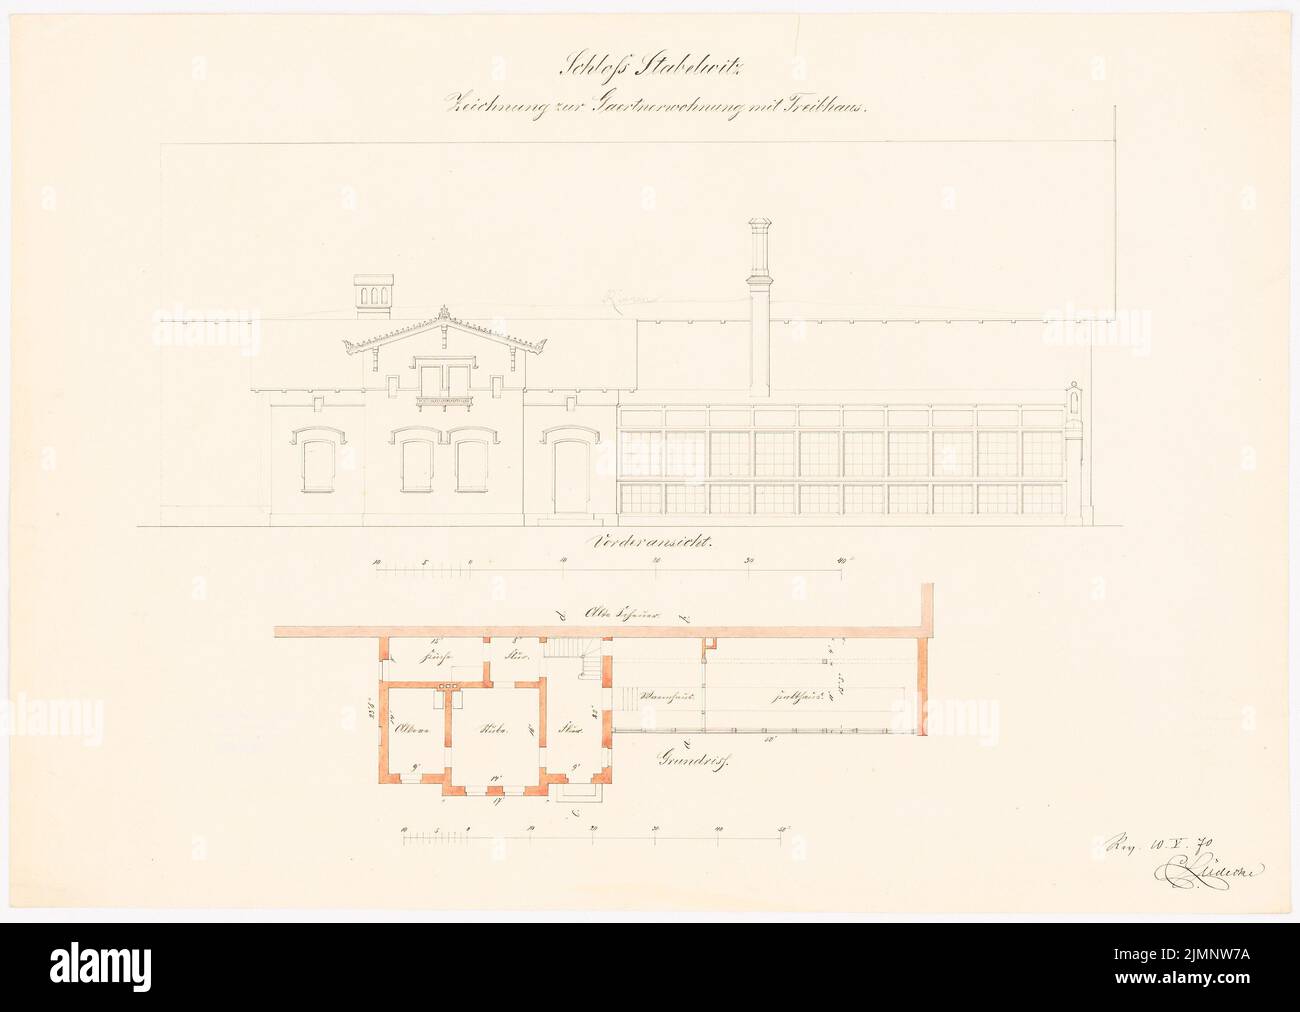 Lüdecke Carl Johann Bogislaw (1826-1894), Castle in Stabelwitz. Greenhouse with gardener apartment - 2nd draft (May 10, 1870): floor plan, ancestry front view, 2 scale strips. Tusche watercolor on the box, supplemented with pencil, 38.8 x 54.7 cm (including scan edges) Lüdecke Carl Johann Bogislaw  (1826-1894): Schloss Stabelwitz. Treibhaus mit Gärtnerwohnung - 2. Entwurf Stock Photo